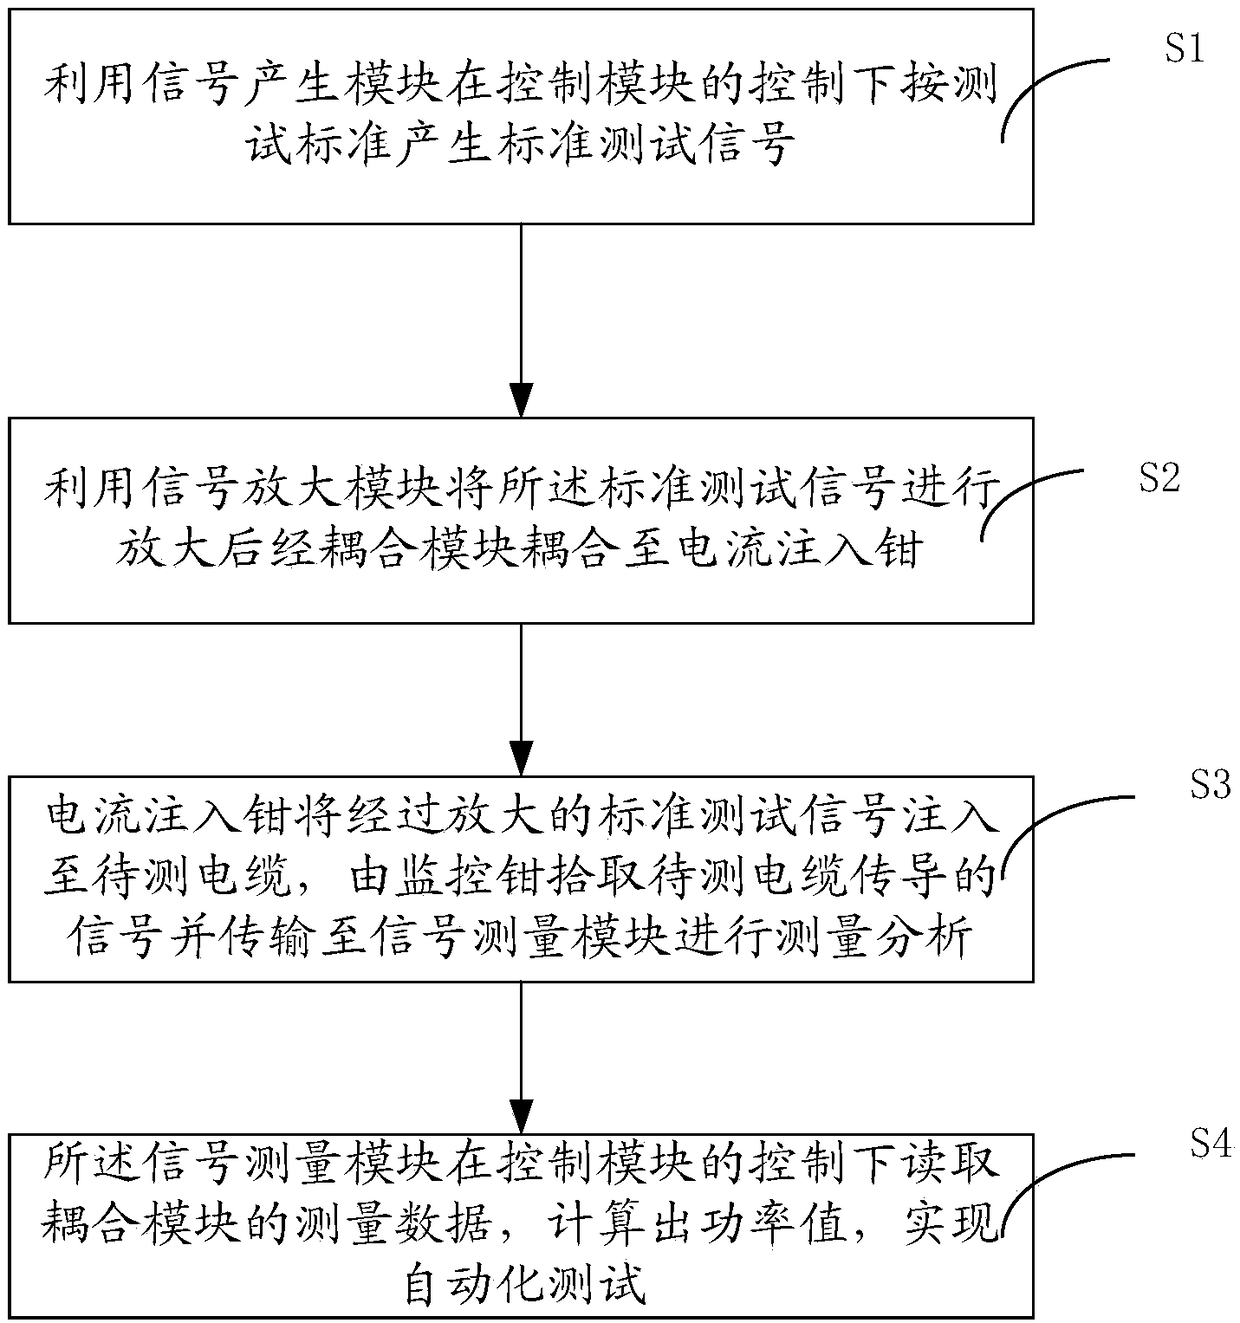 Testing system and method for conducted susceptibility of cable bunch injection